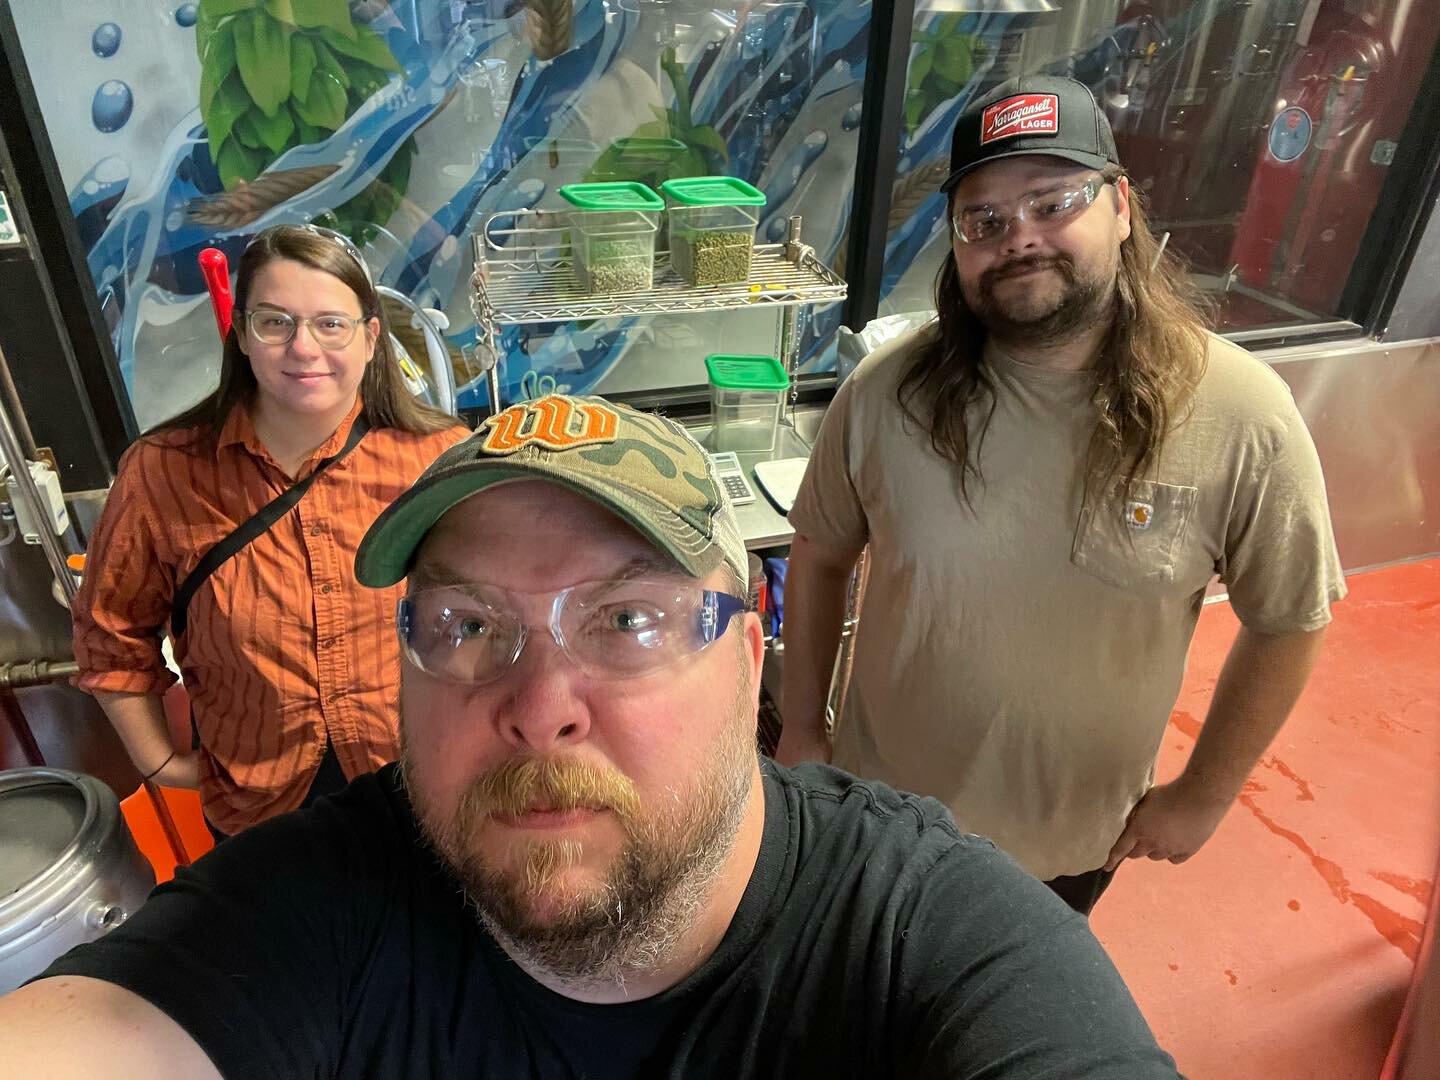 Phill Blair (center) and the team at WECO Bottle & Biergarten visited Highland Brewing Company in Asheville to collaborate on a new beer.